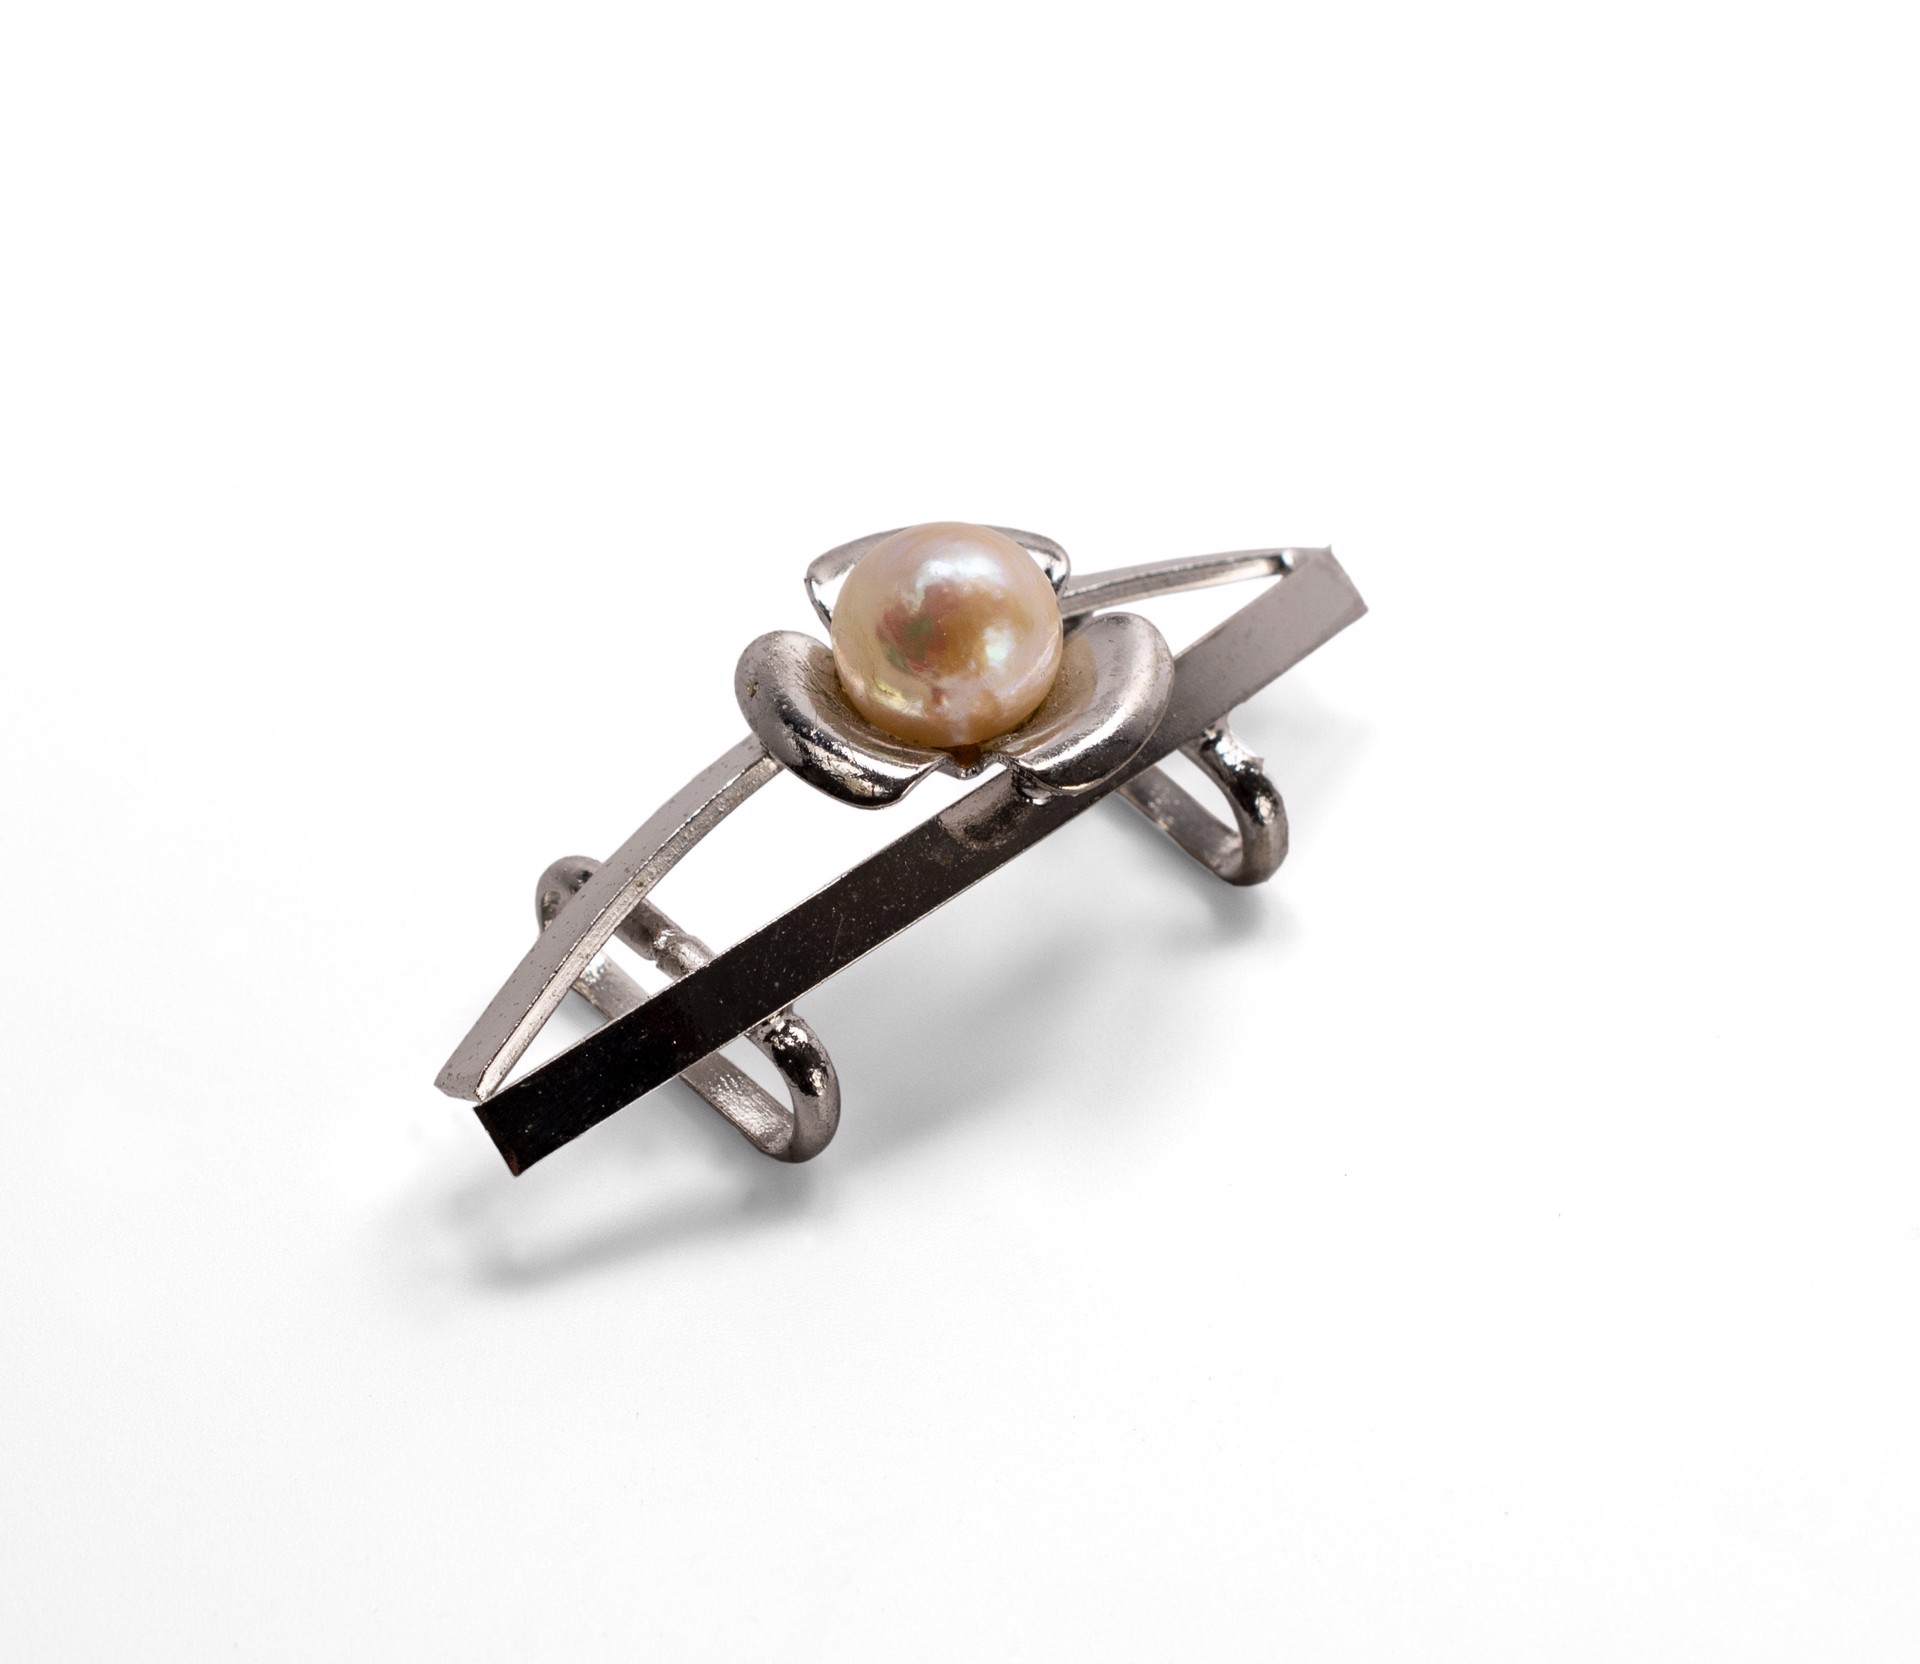 Vintage Art Deco style pearl obi brooch ("Obidome" in Japanese) by Kimono Accessories